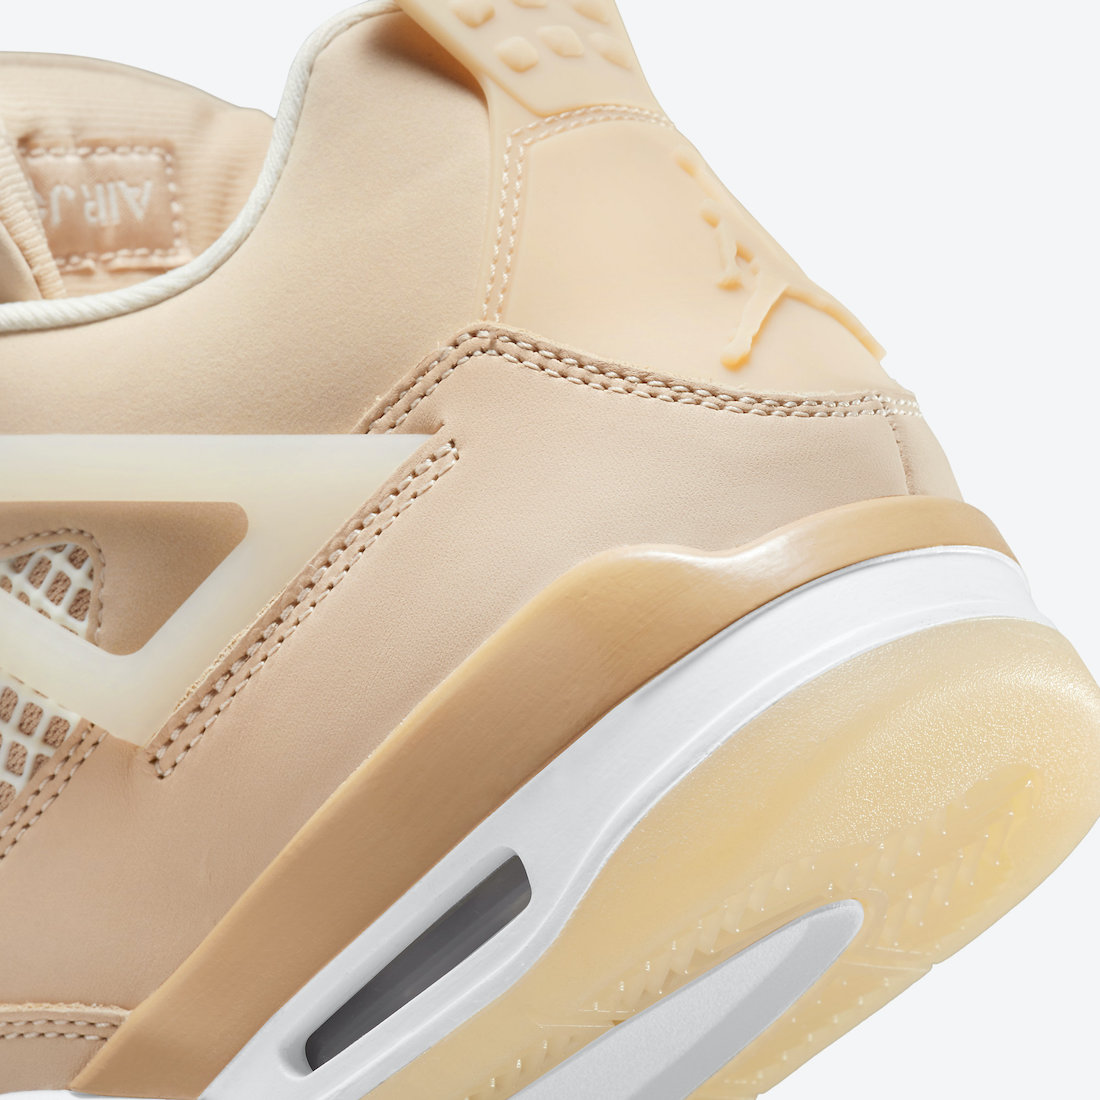 Keep scrolling to take a deep dive into some of the best Air Jordan 4s of all time Shimmer WMNS DJ0675-200 Release Date Price